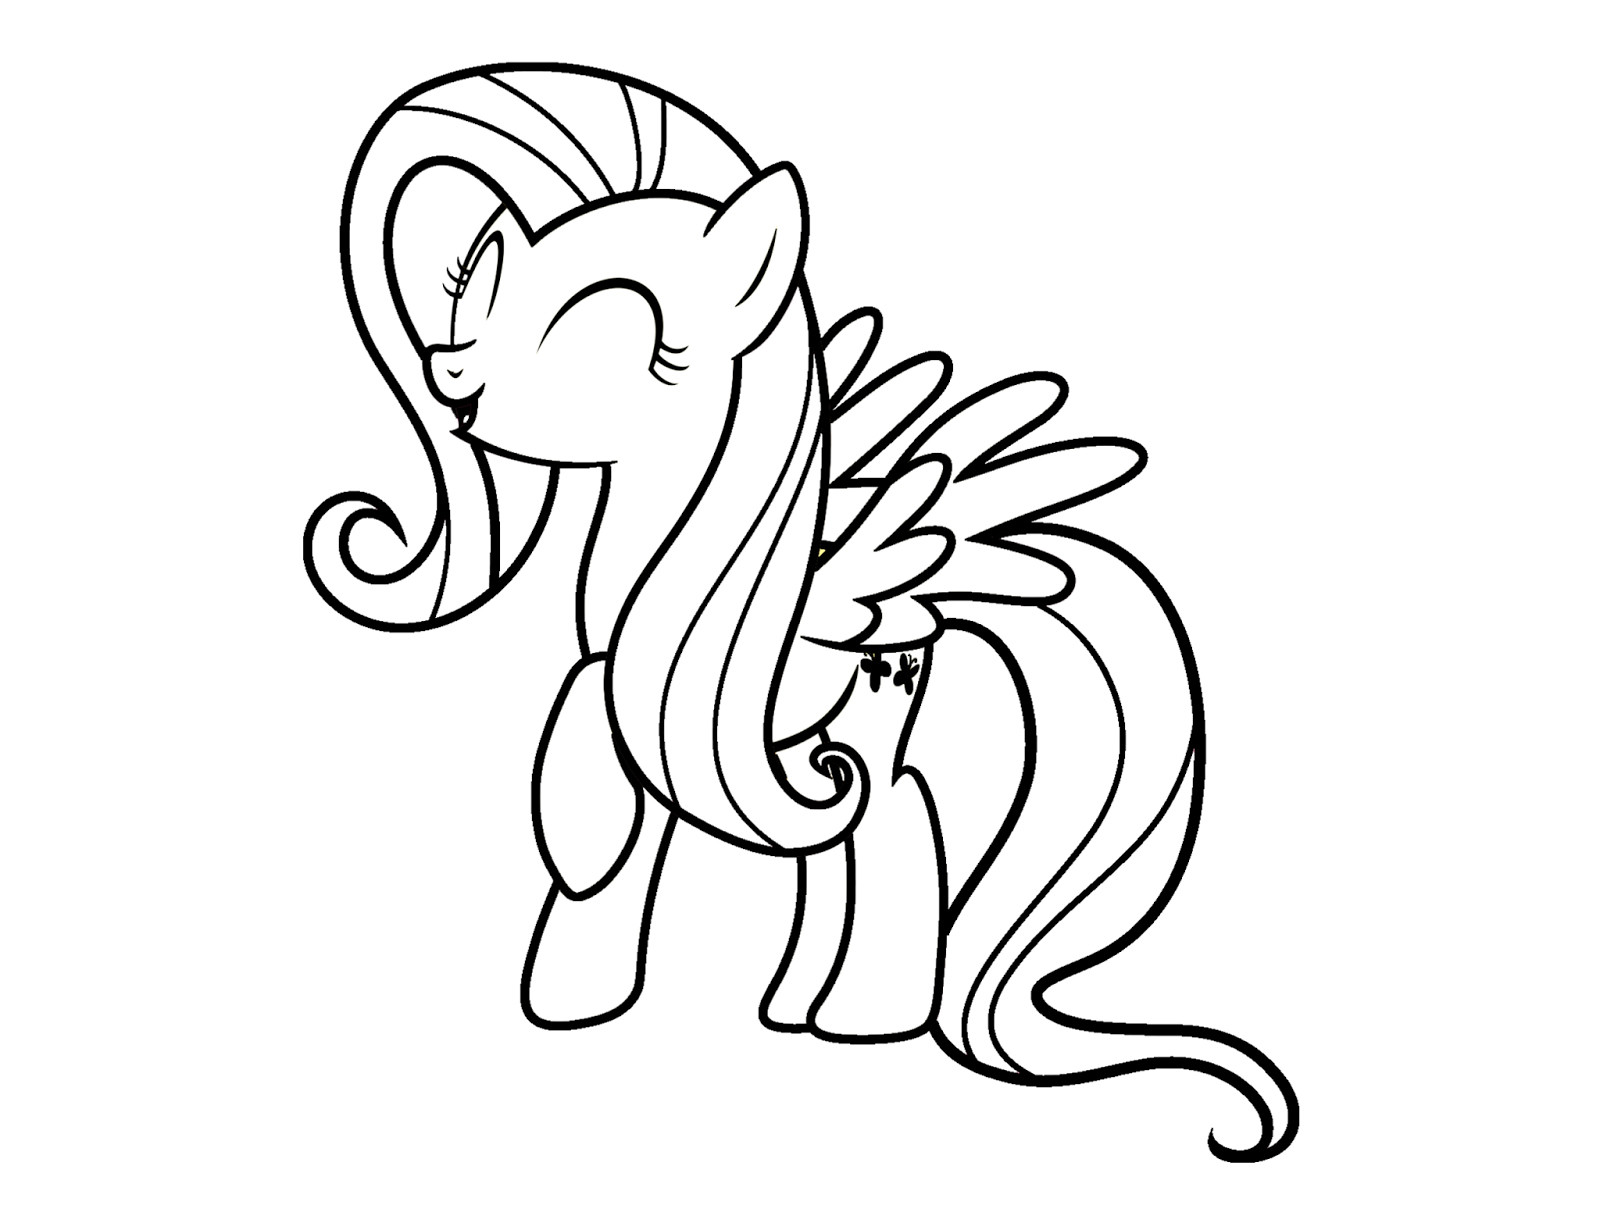 Coloring Books For Little Kids
 Free my little pony coloring pages Coloring pages for kids